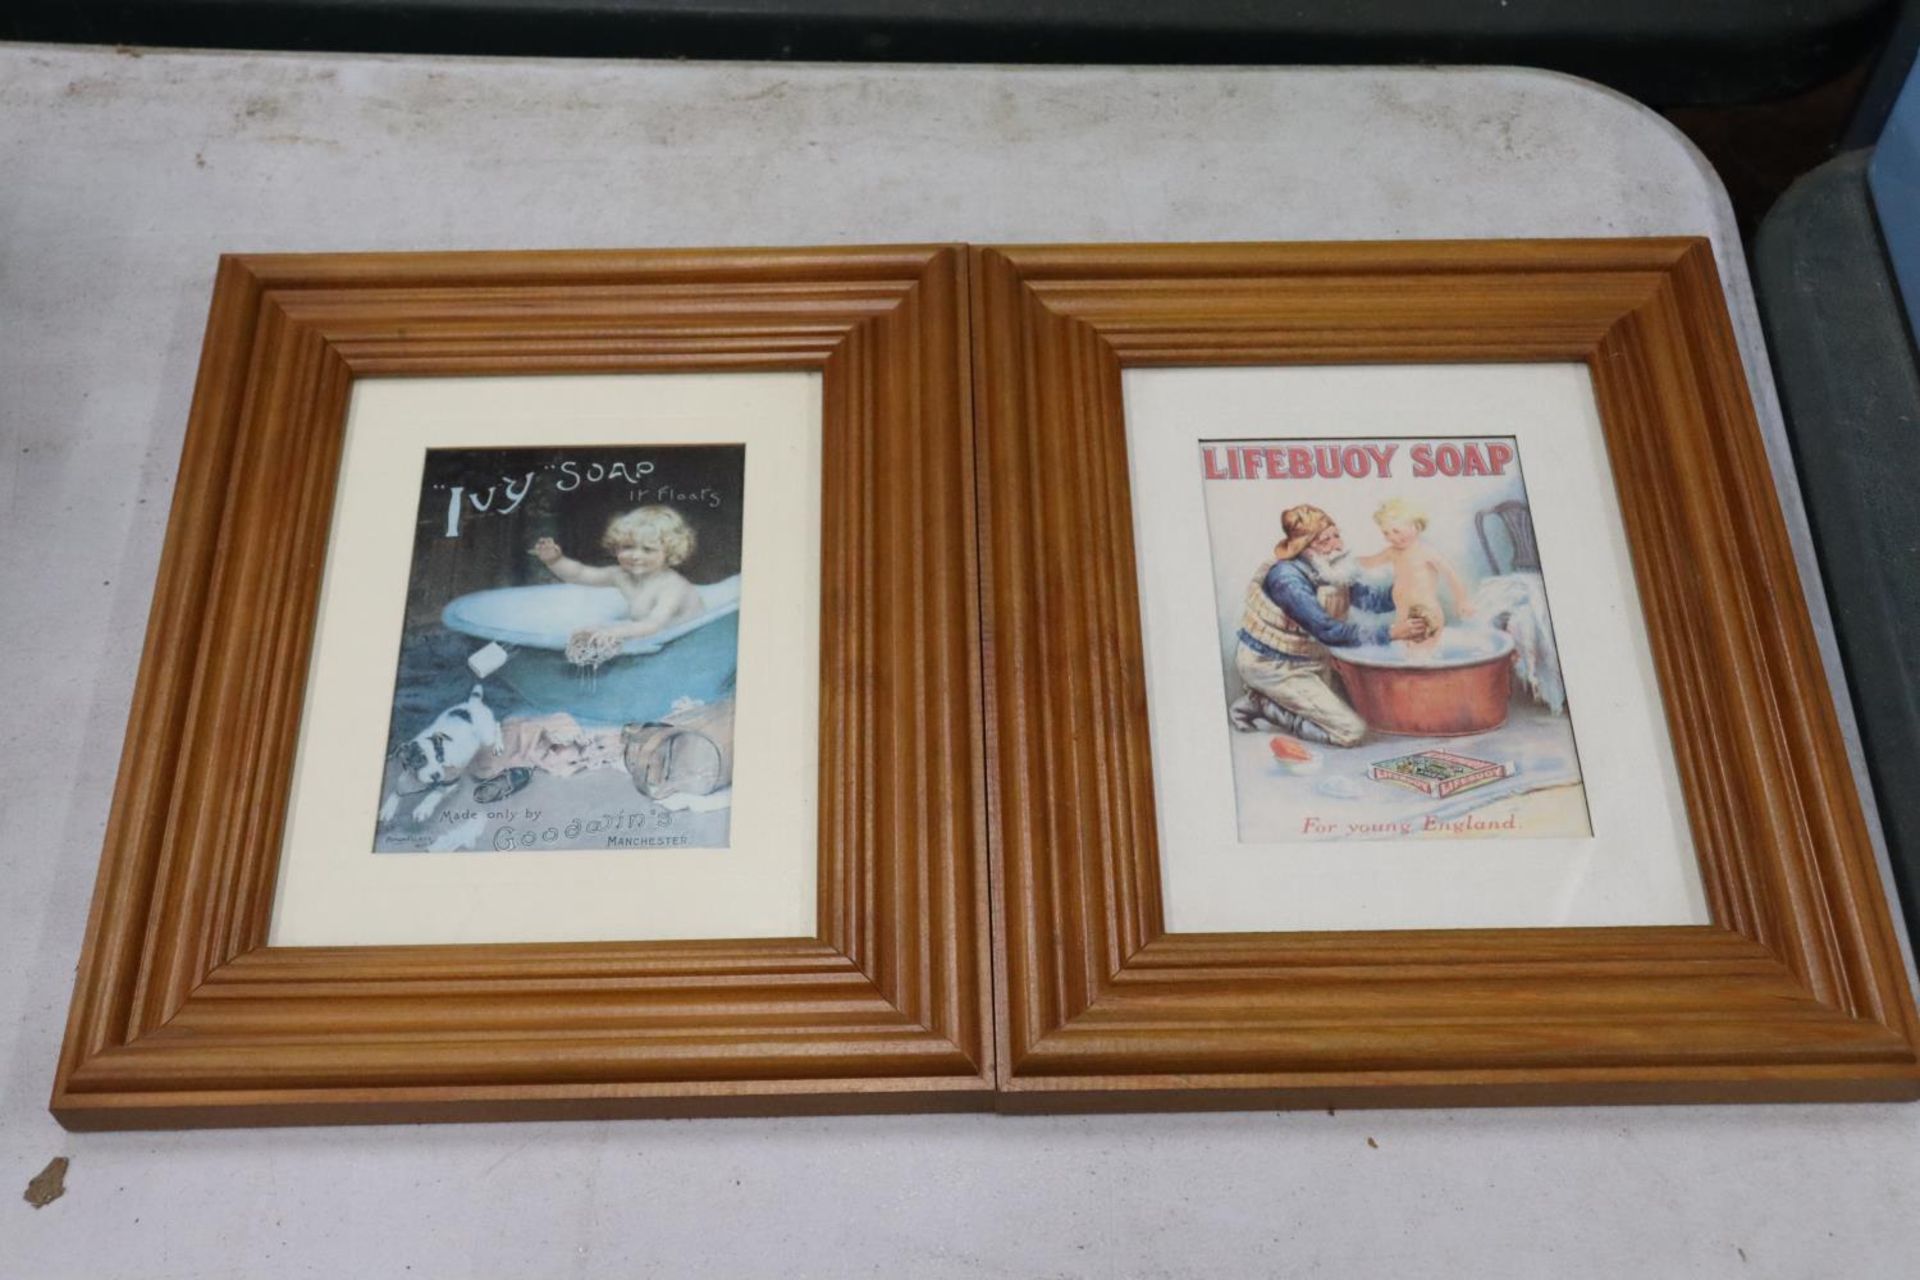 SIX FRAMED ADVERTISING PRINTS TO INCLUDE PEARS' AND LIFEBUOY SOAP, 23CM X 28CM - Image 4 of 5